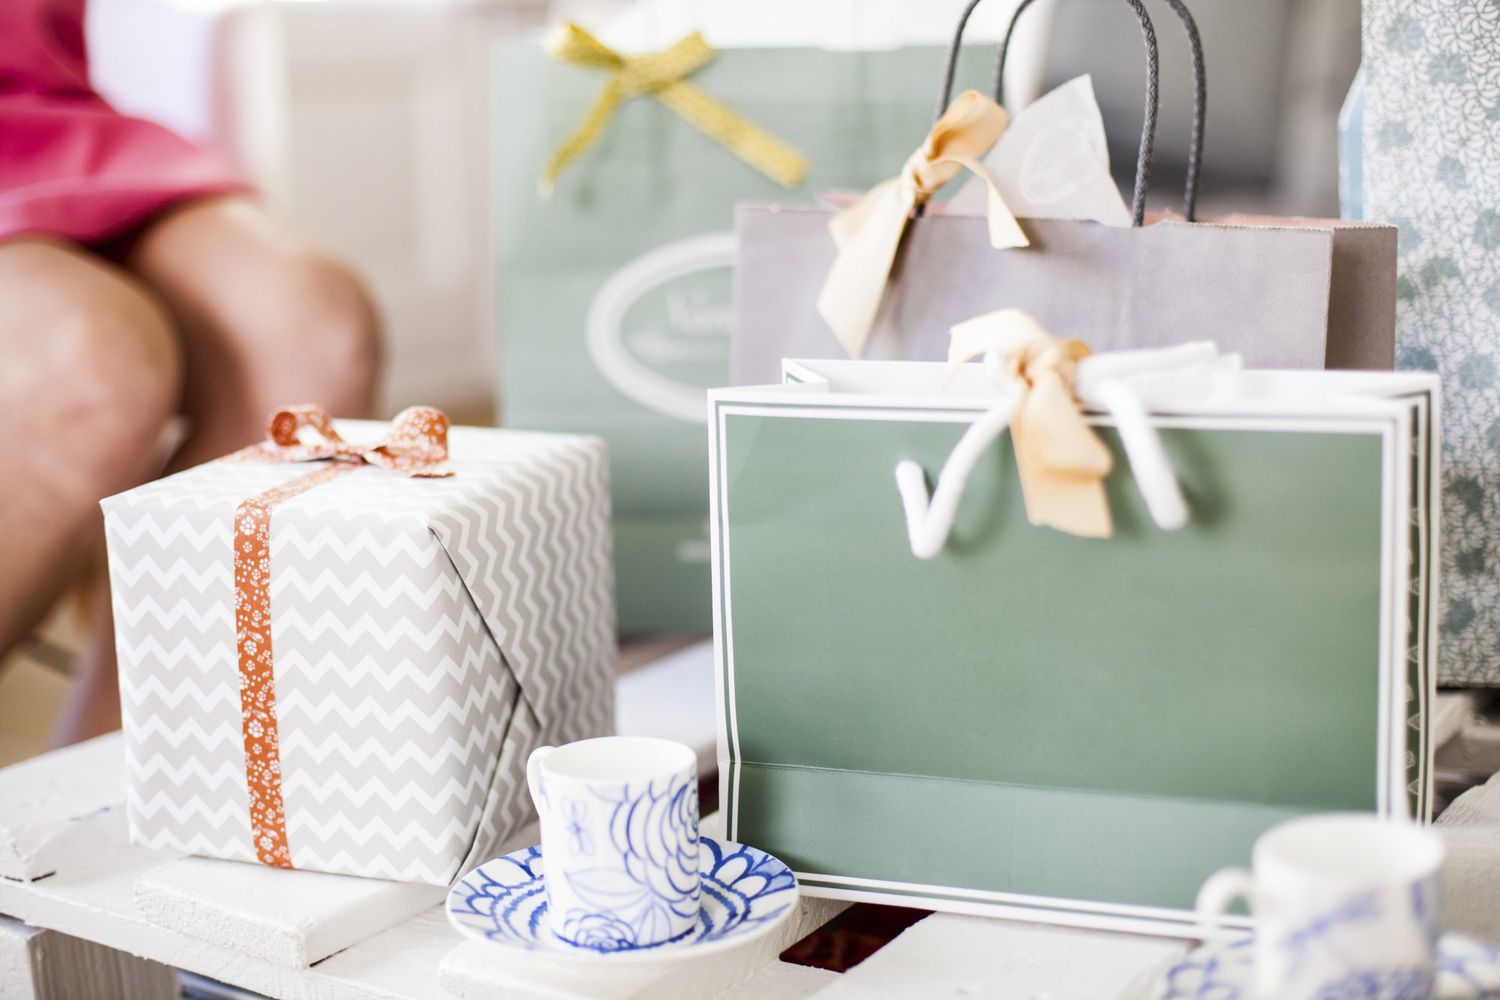 How much to spend on baby shower gift